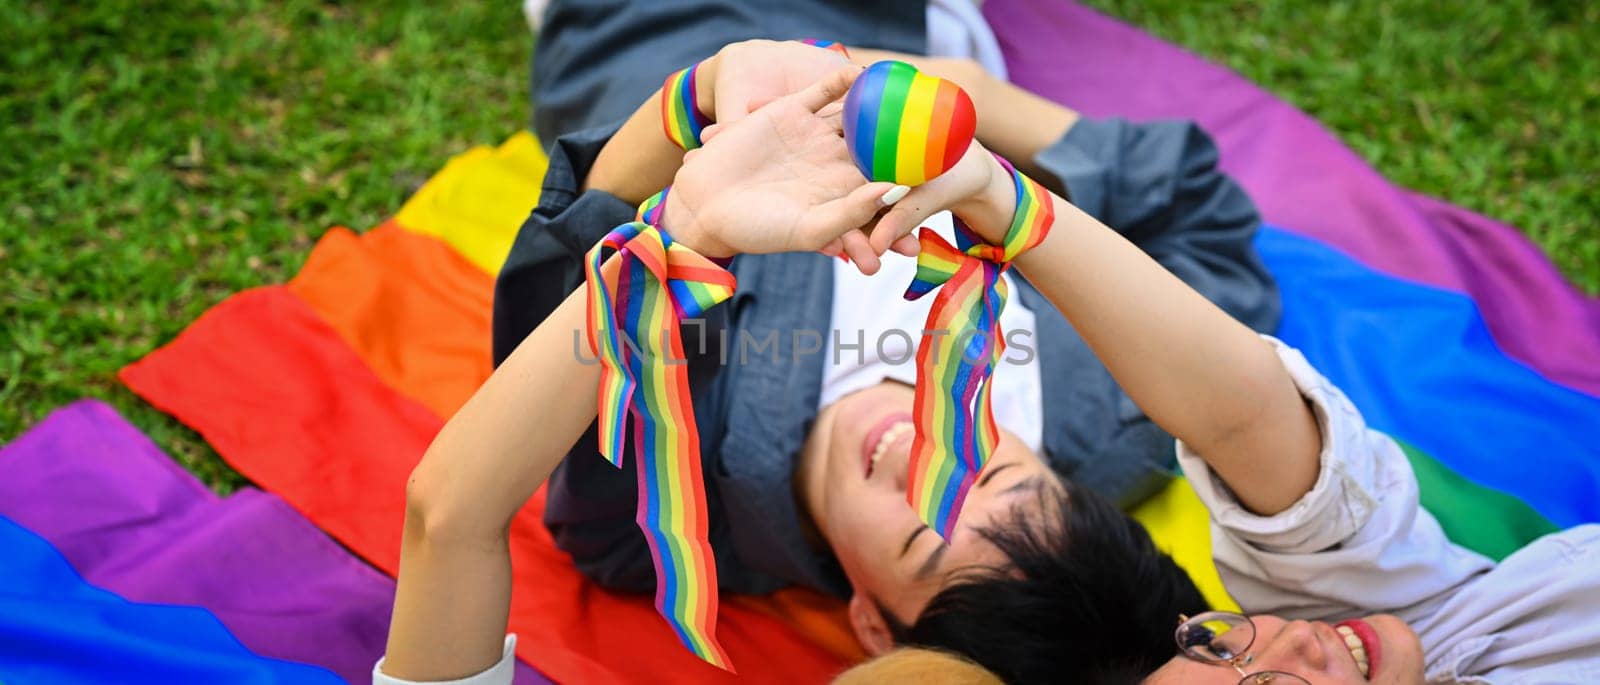 Young people lying on green grass with LGBTQ pride flag, supporting LGBTQ community and equality social.